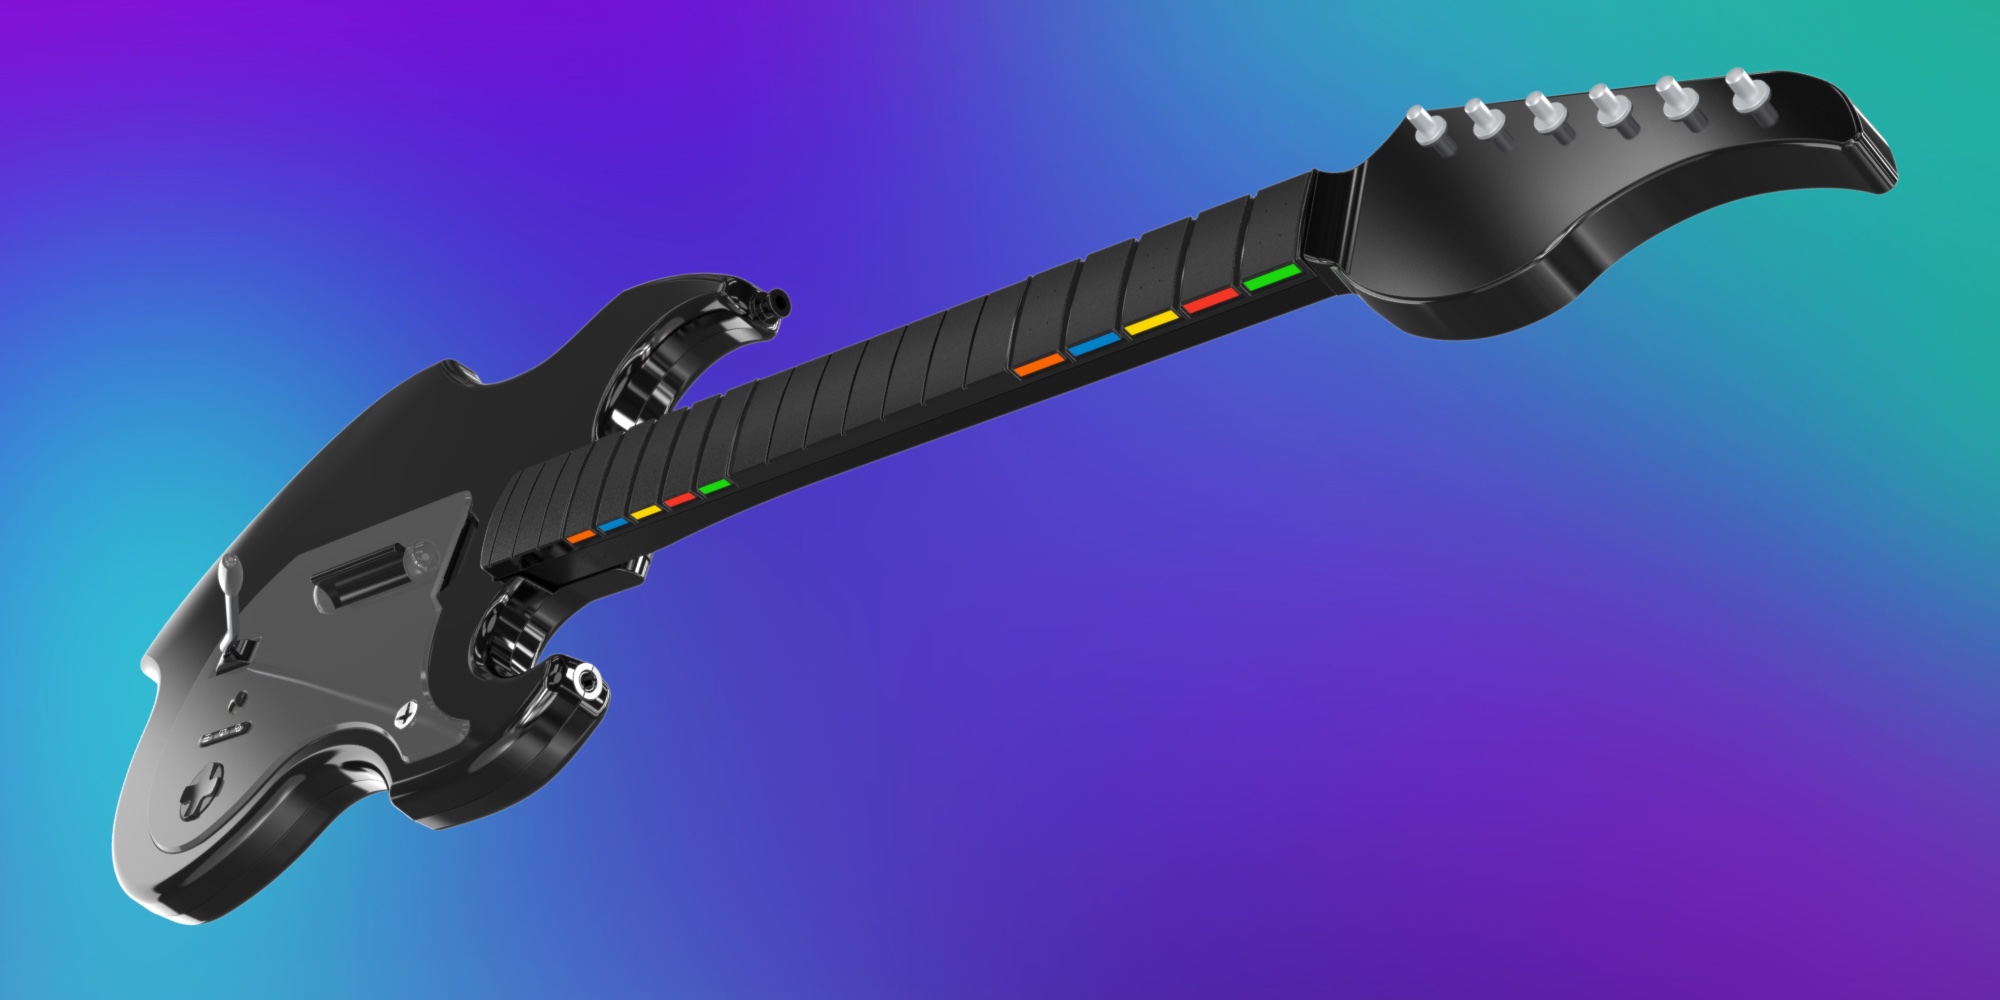 New Fortnite Festival guitar controller is the axe you need